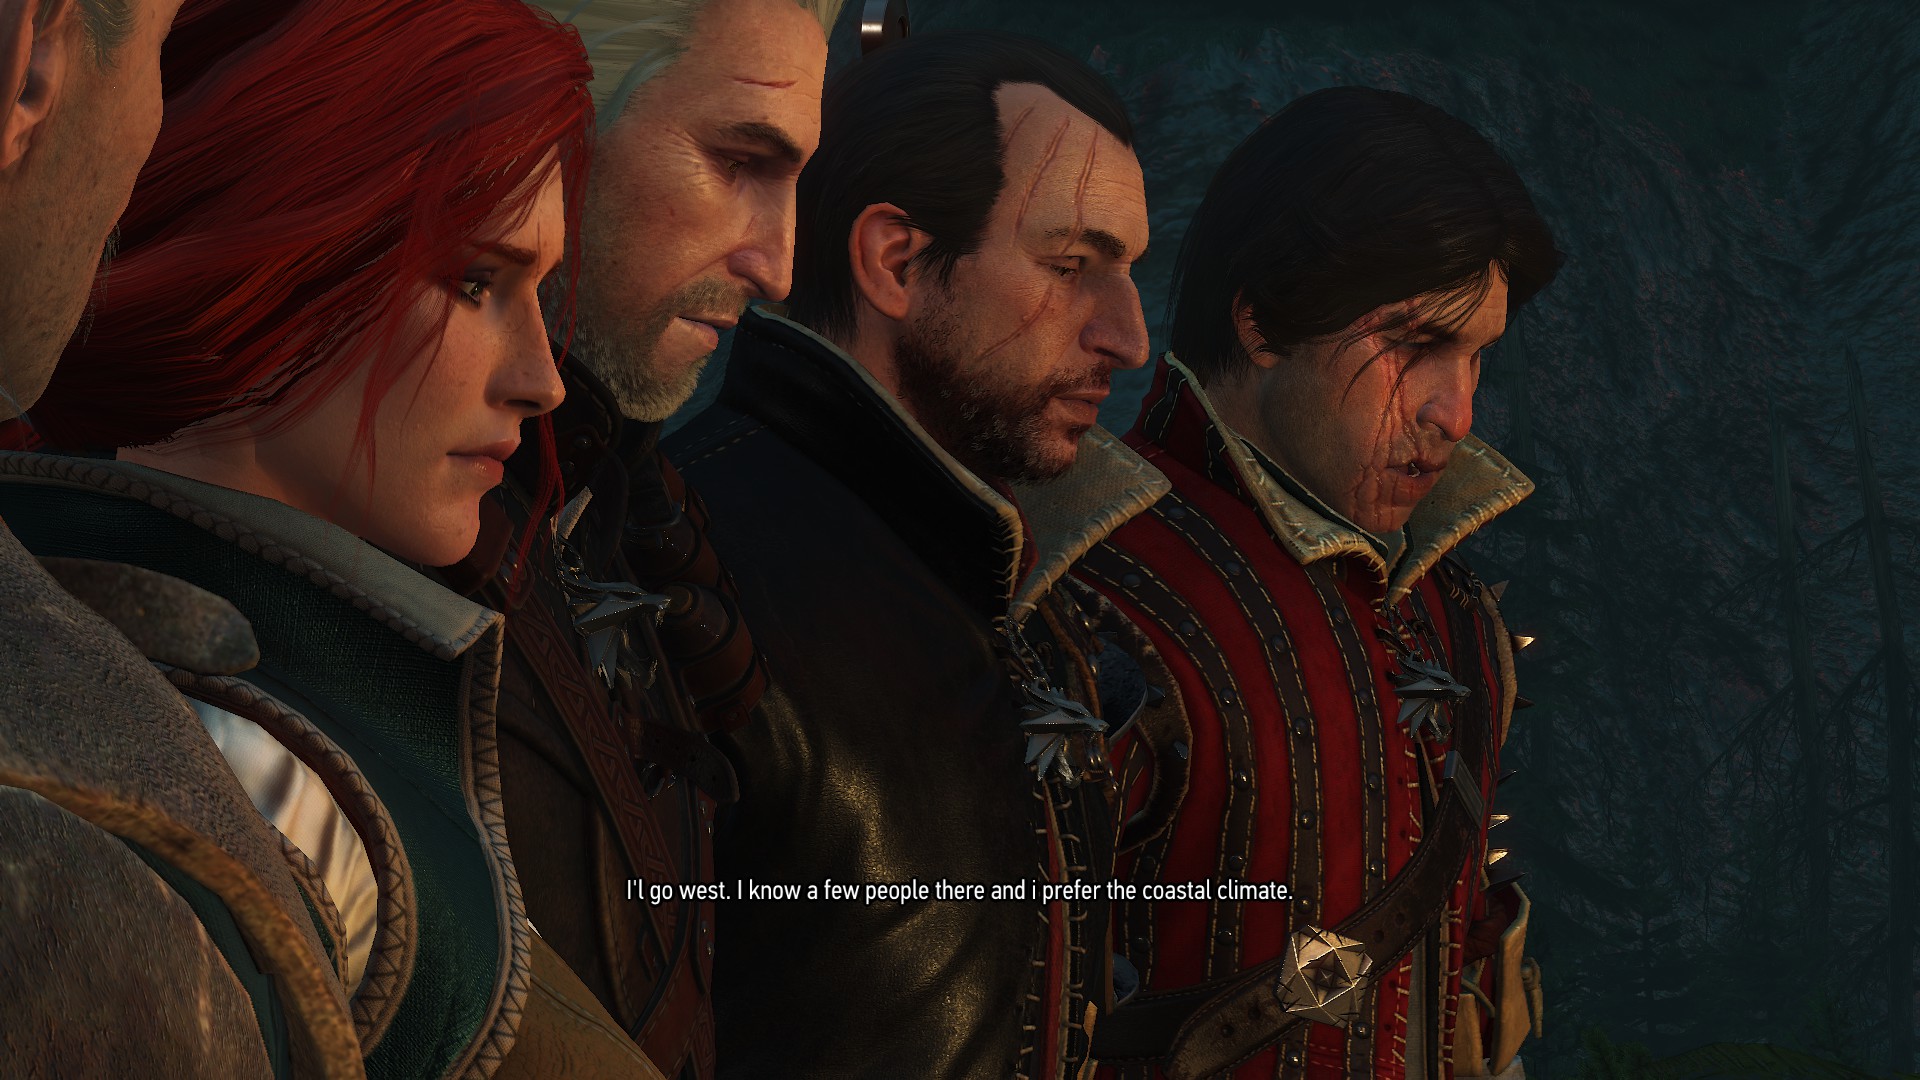 The Witcher 1: Prologue (Remastered) ☆ FULL MOVIE / ALL CUTSCENES 【The  Witcher 3 Mod / 1080p HD】 